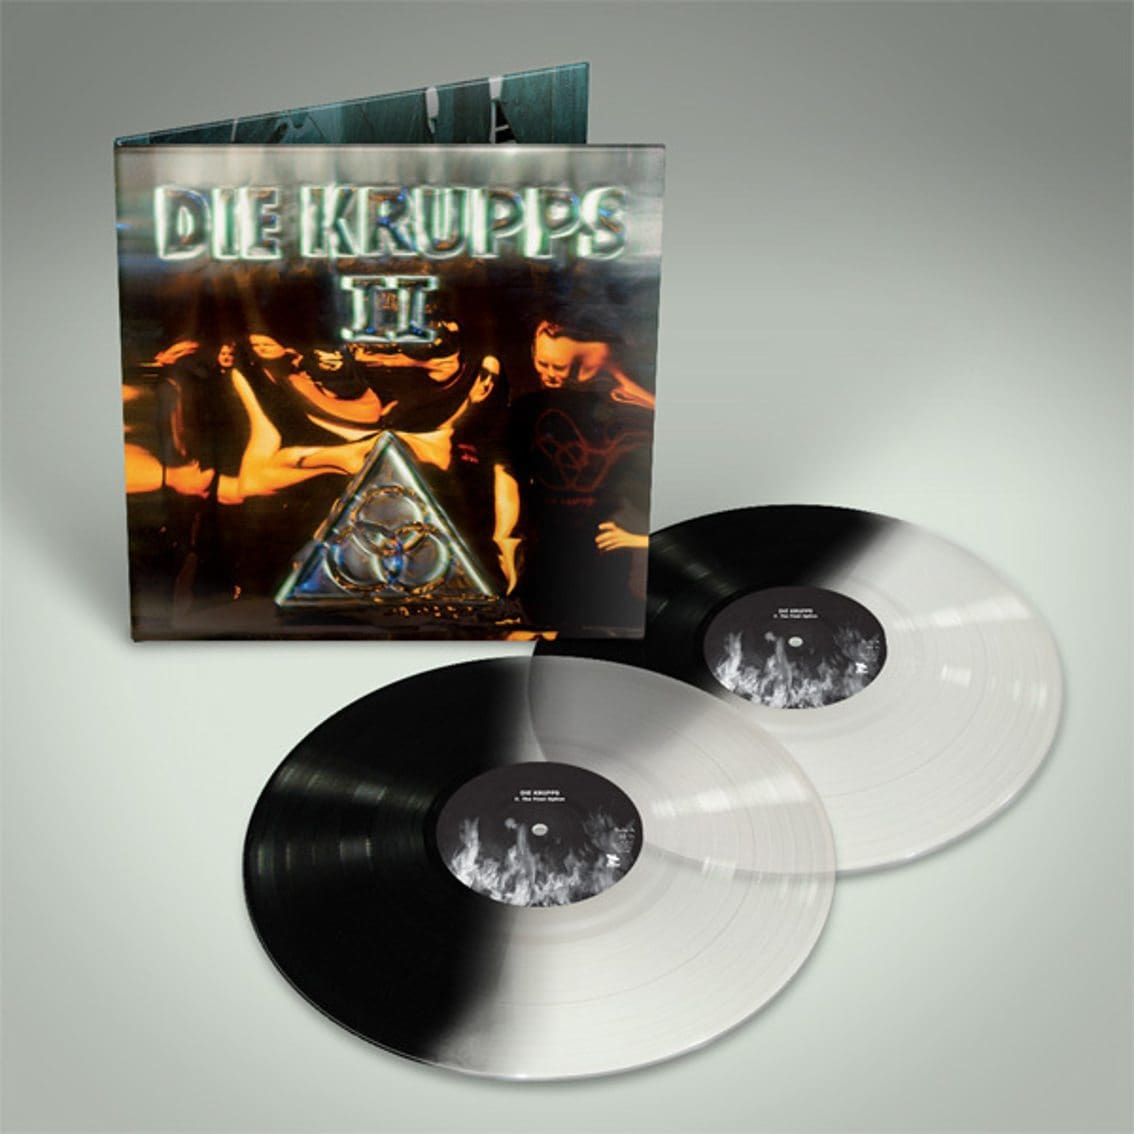 Die Krupps sees vinyl reissue of'II: The Final Option' including 11 bonus remixes by The Sisters Of Mercy, Paradise Lost, ...